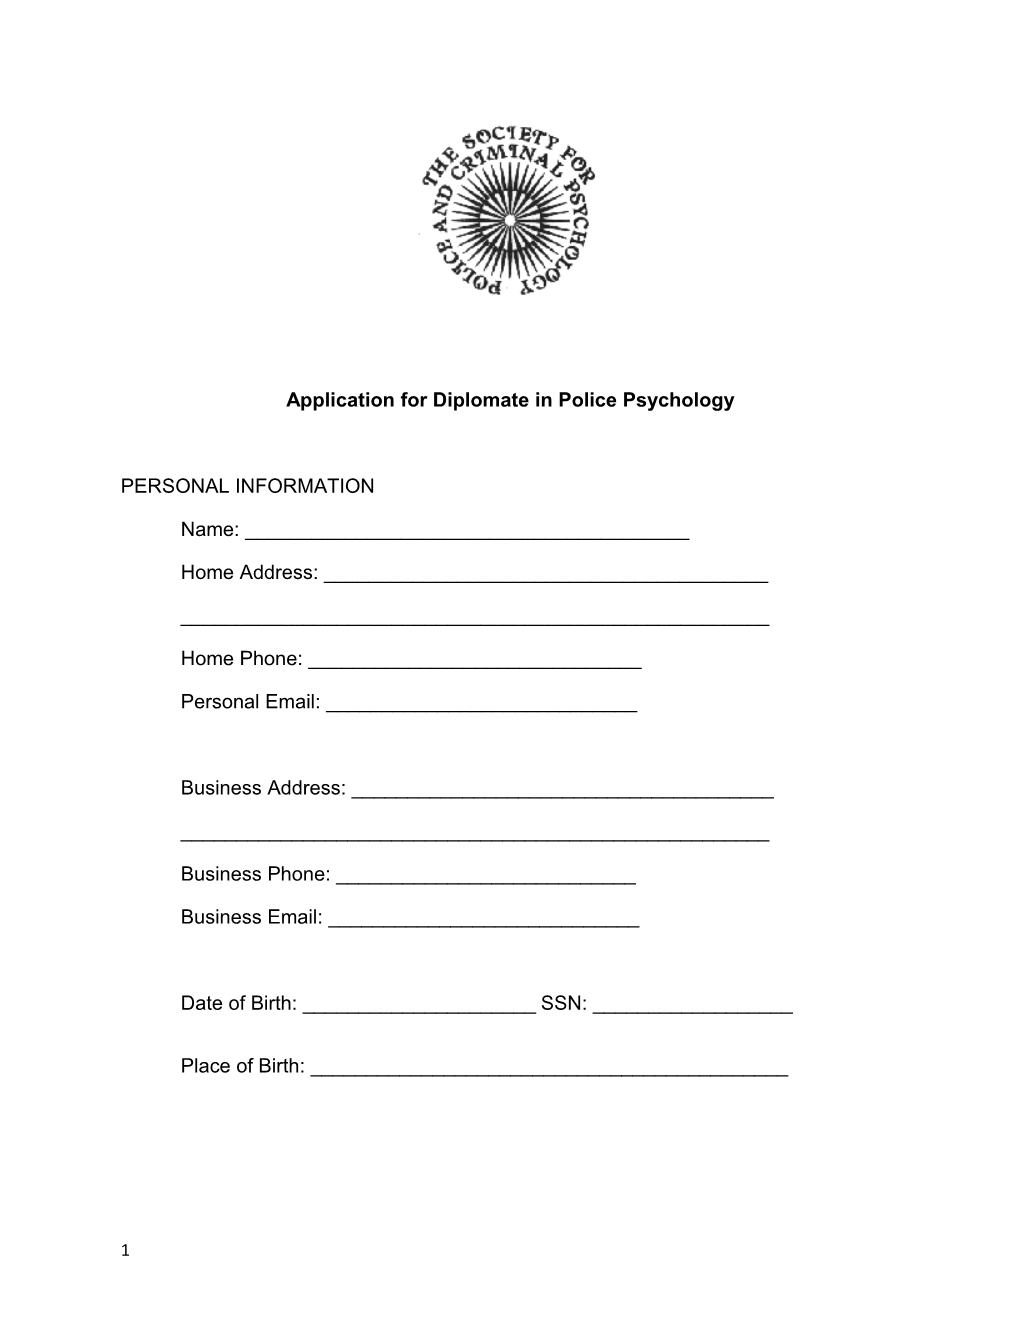 Application for Diplomate in Police Psychology